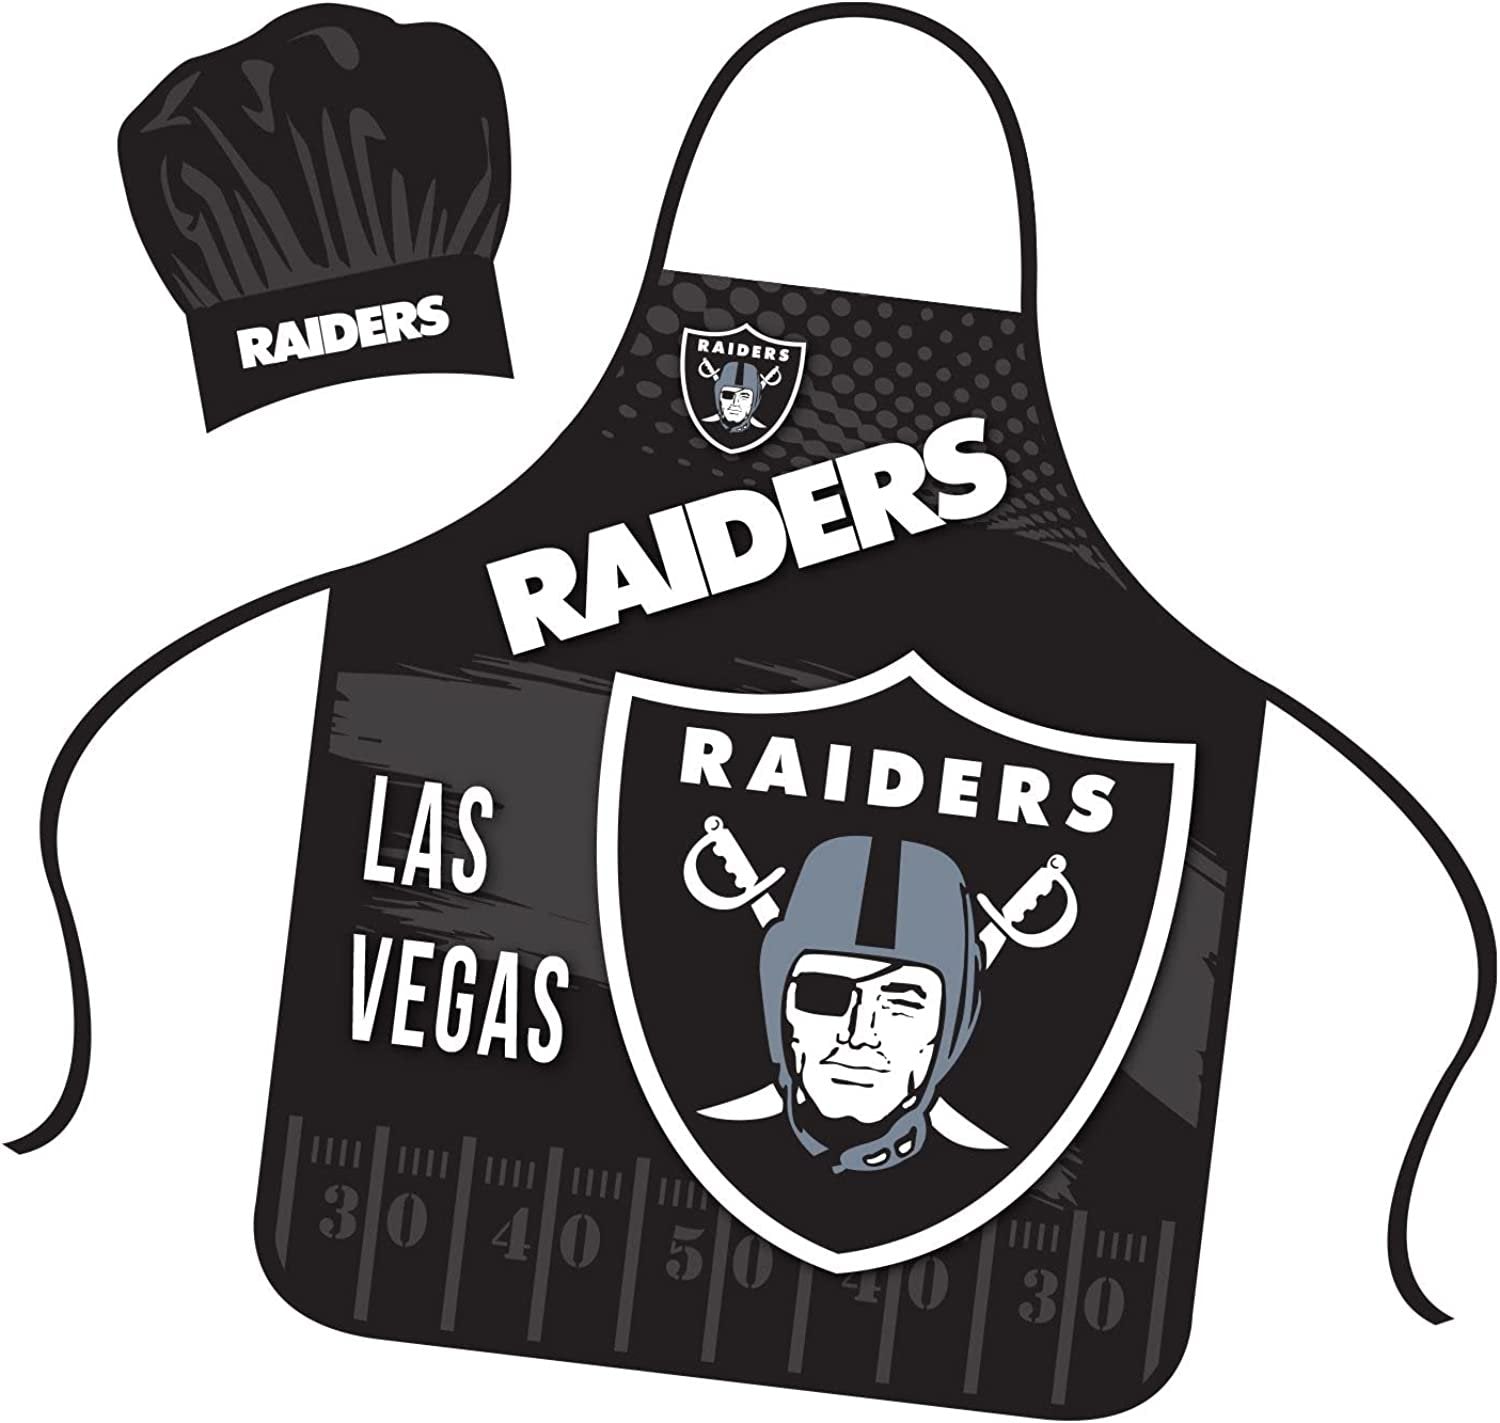 Las Vegas Raiders Apron Chef Hat Set Full Color Universal Size Tie Back Grilling Tailgate BBQ Cooking Host